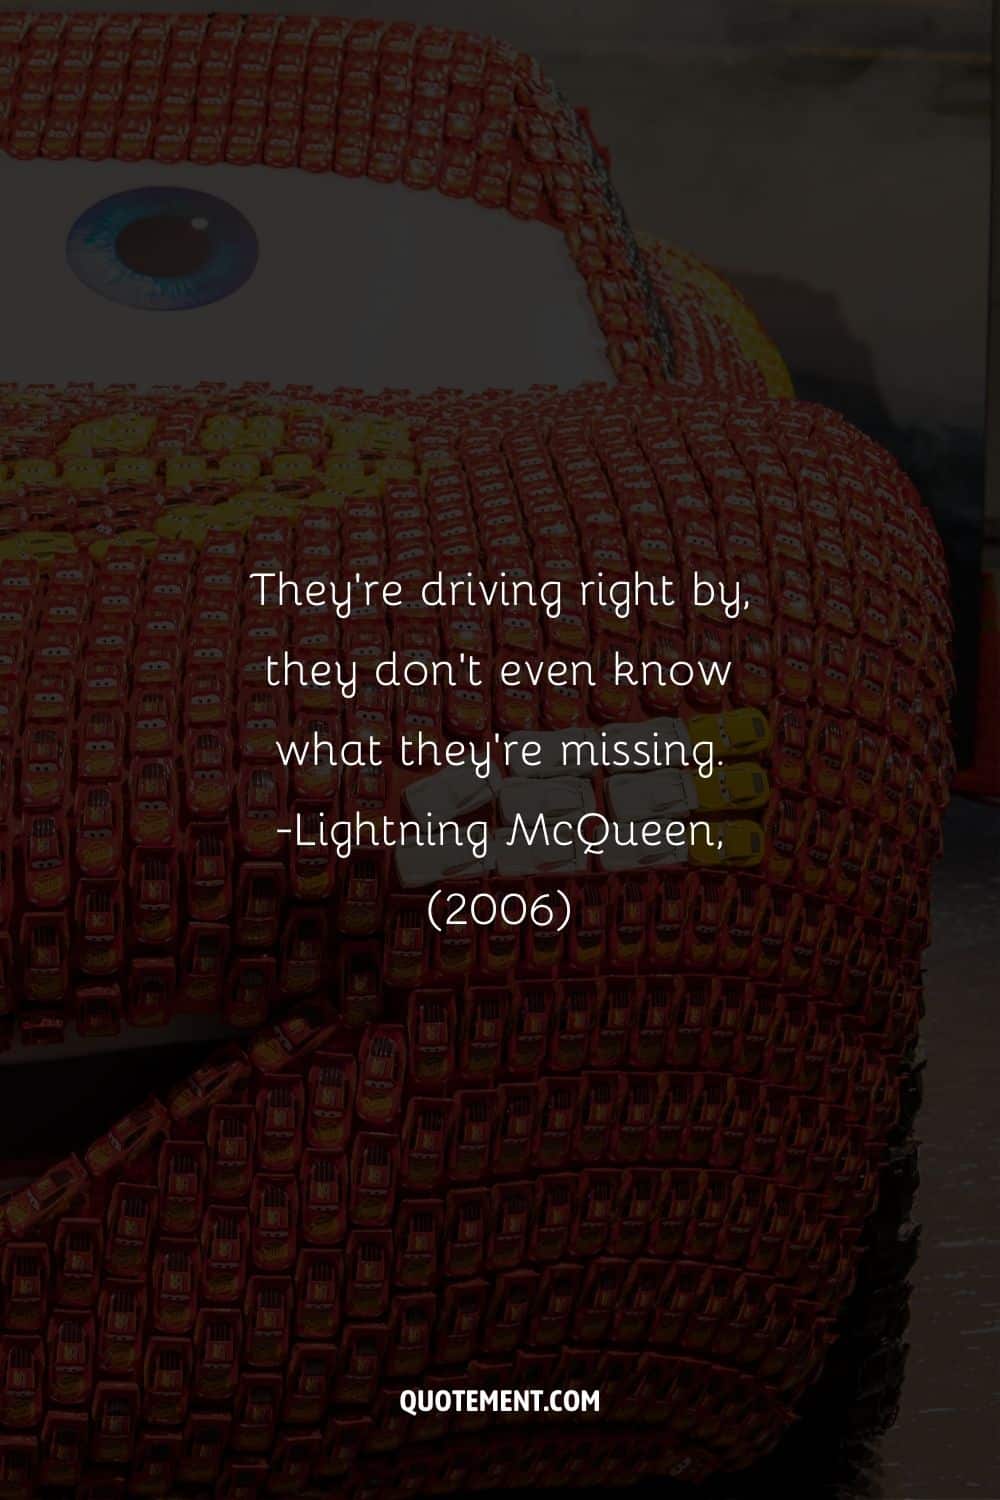 They're driving right by, they don't even know what they're missing. - Lightning McQueen, (2006).